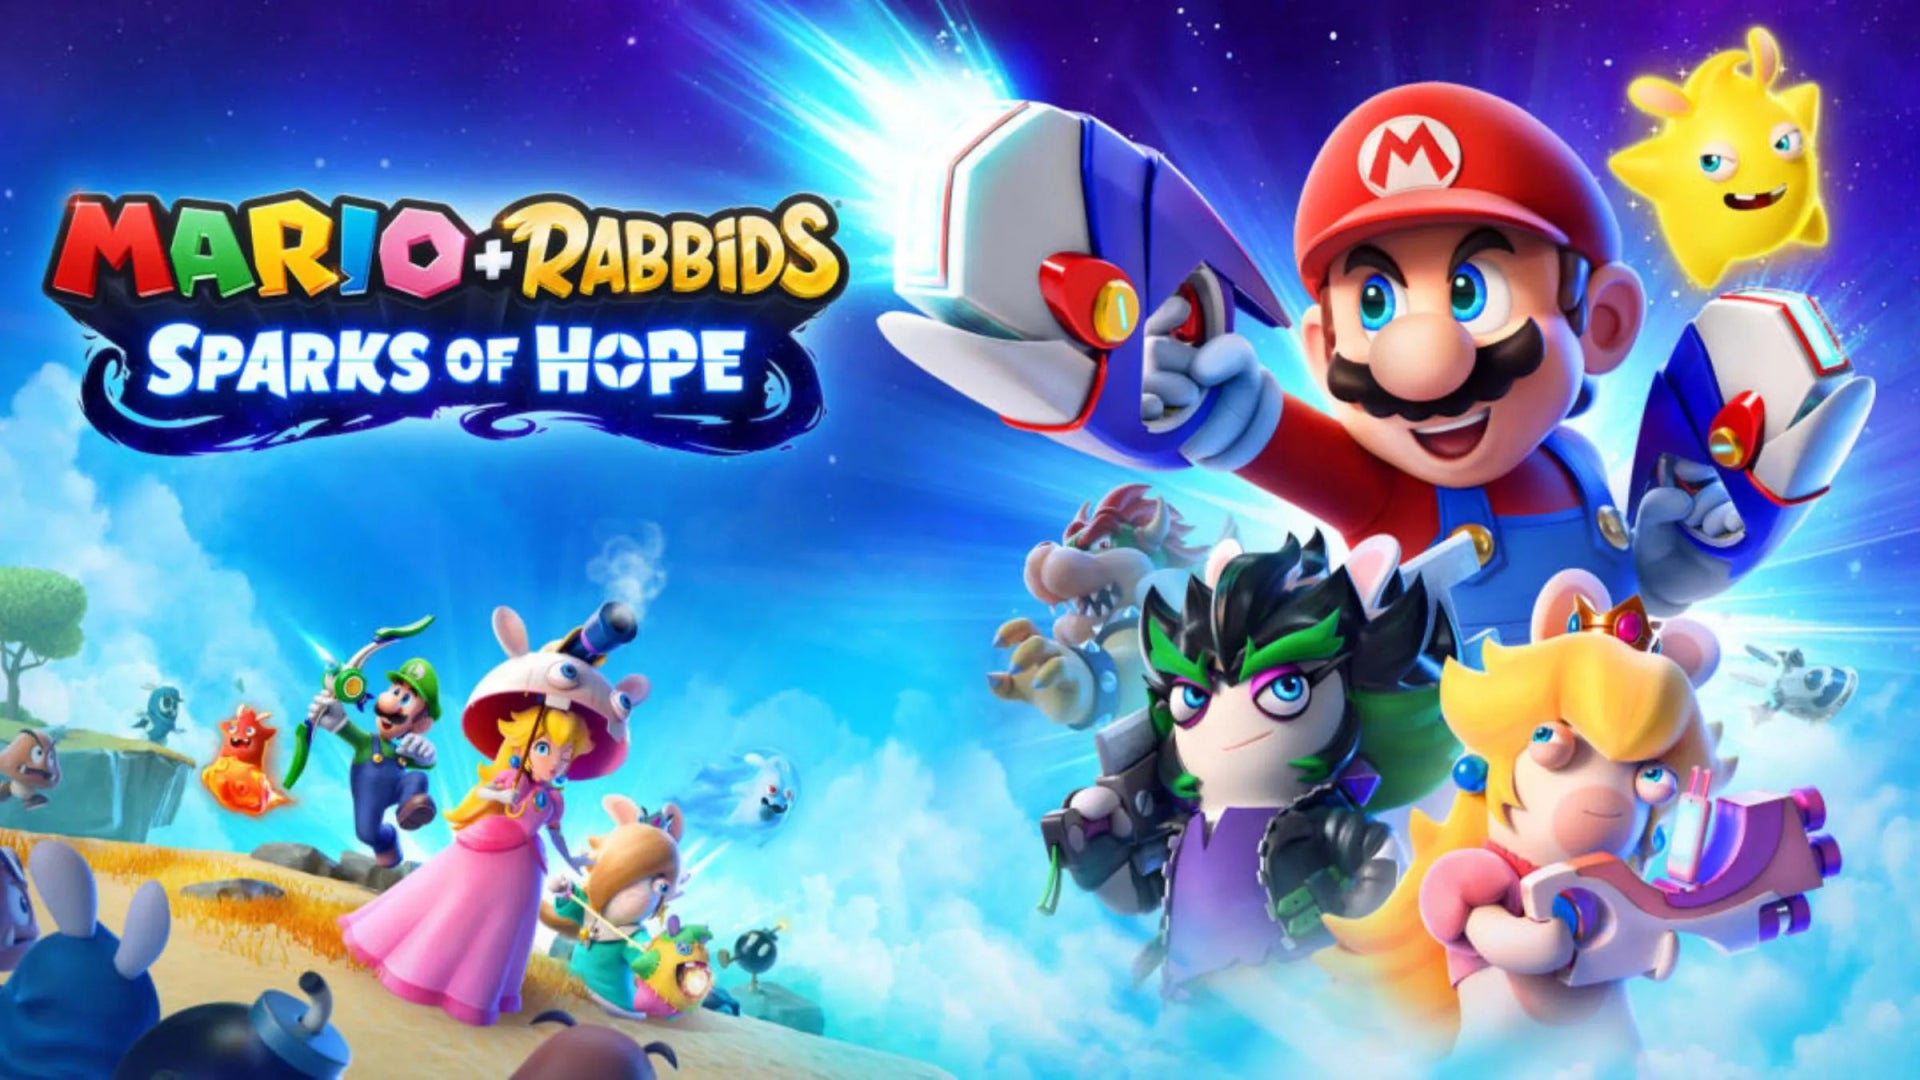 In this Mario + Rabbids Sparks of Hope artwork, multiple characters can be seen including Mario, Luigi, Peach, Rabbid Peach, Rabbid Rosalina, Bowser, Edge, a Looma, a Goomba, and more.